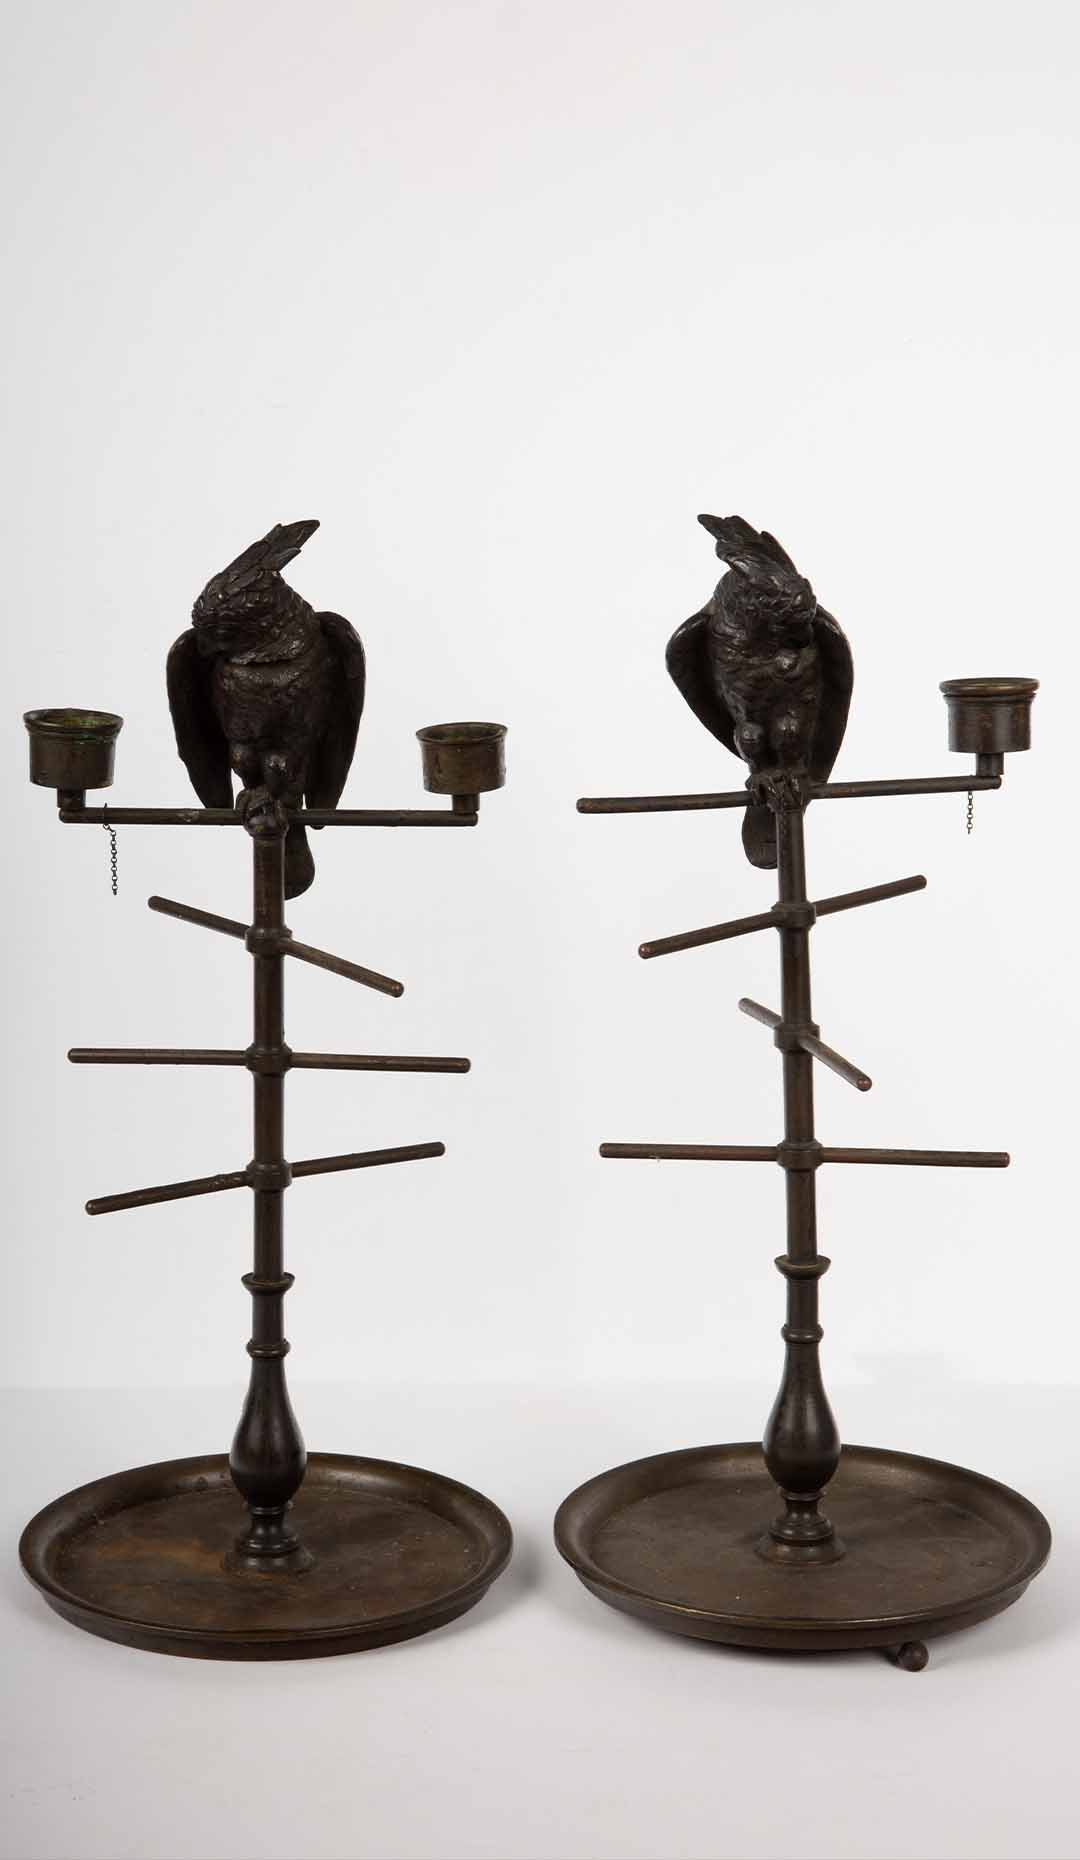 Whimsical 19th Century Parakeet Perch Inkwells: Ink 'n' Perch Delight!